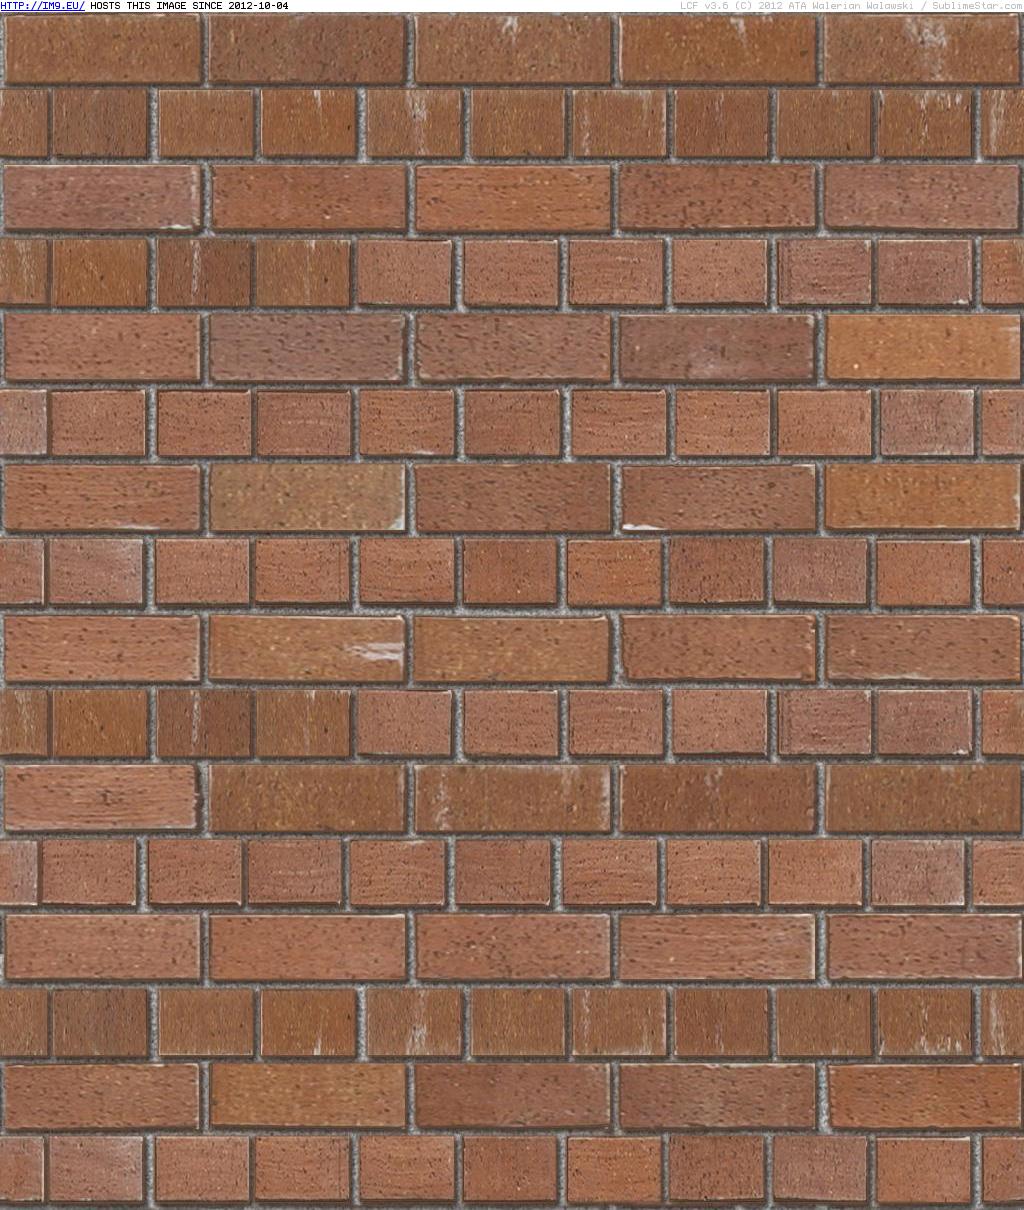 Brick wall texture 2 (in Brick walls textures and wallpapers)